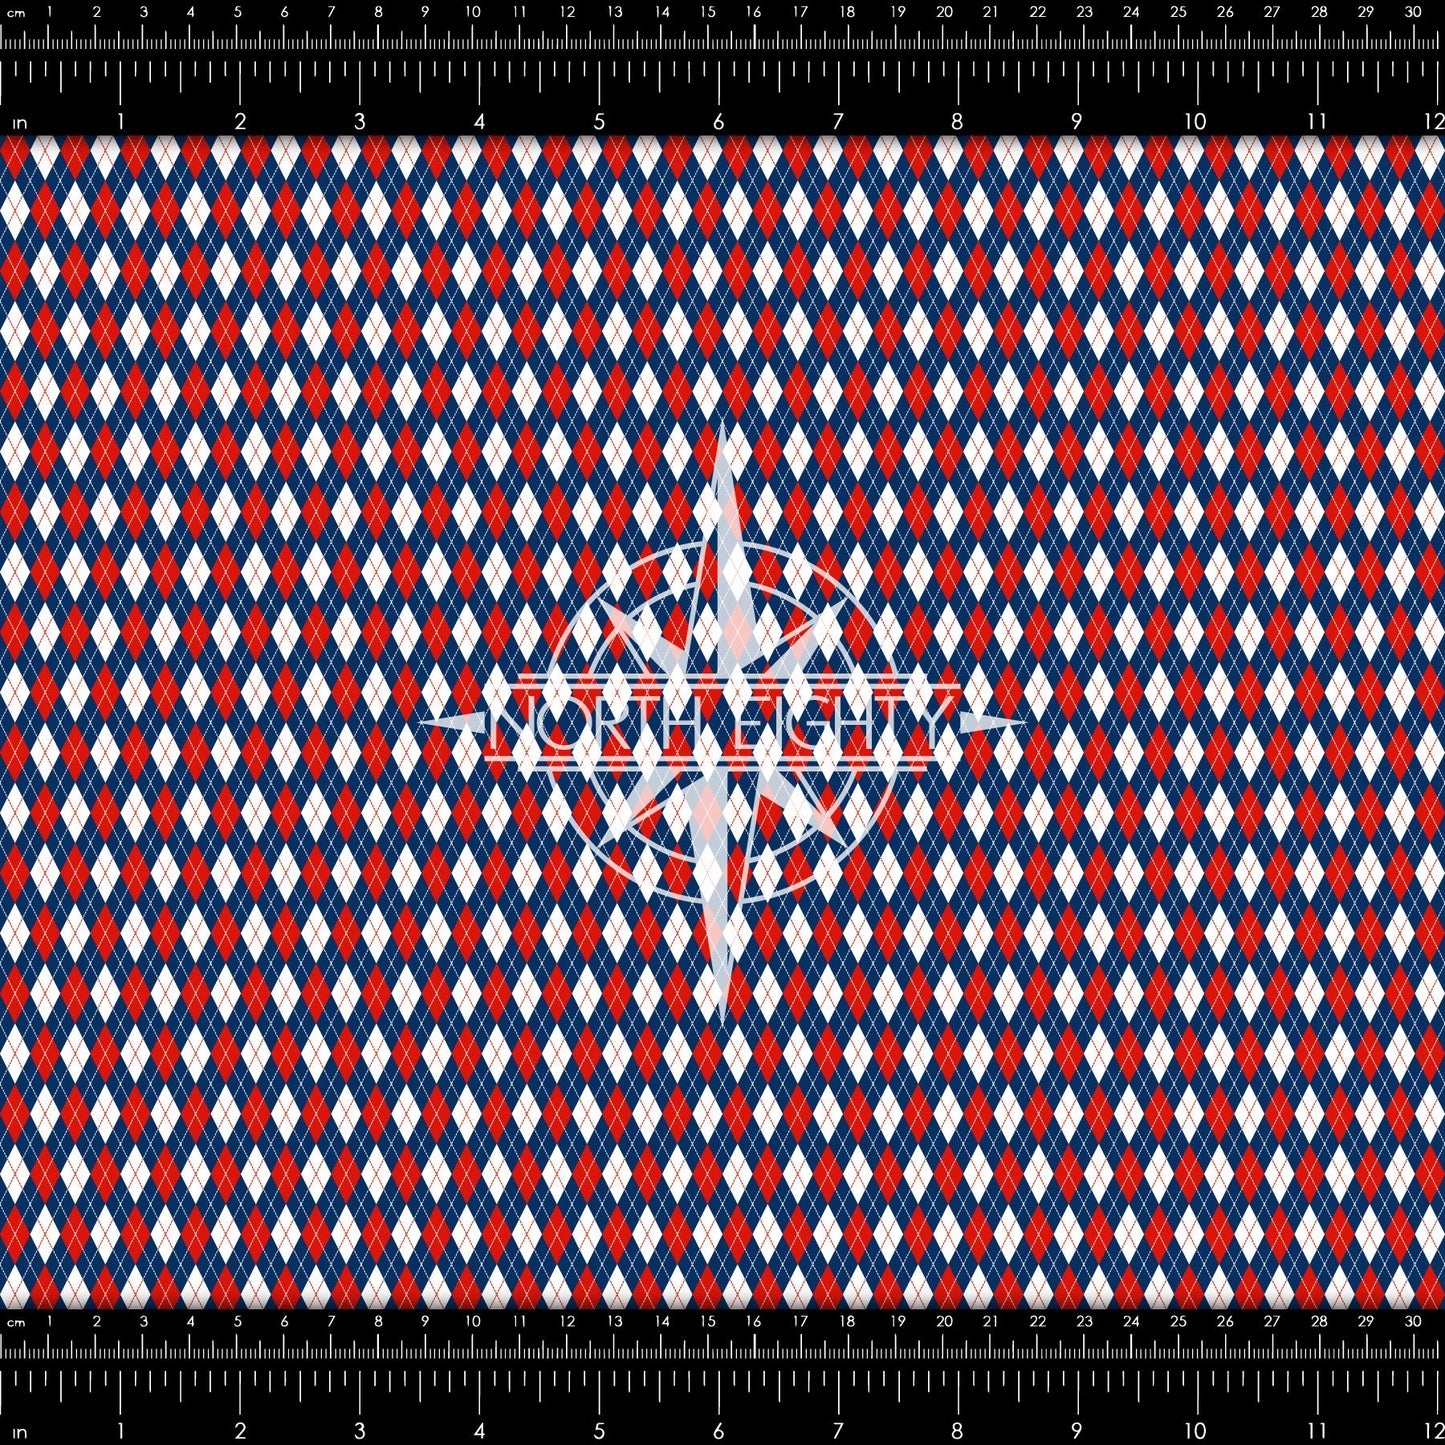 Patriotic htv - 4th of July Heat Transfer Vinyl - Argyle Printed Vinyl - Patterned Adhesive - Independence Day Plaid - Red and Blue